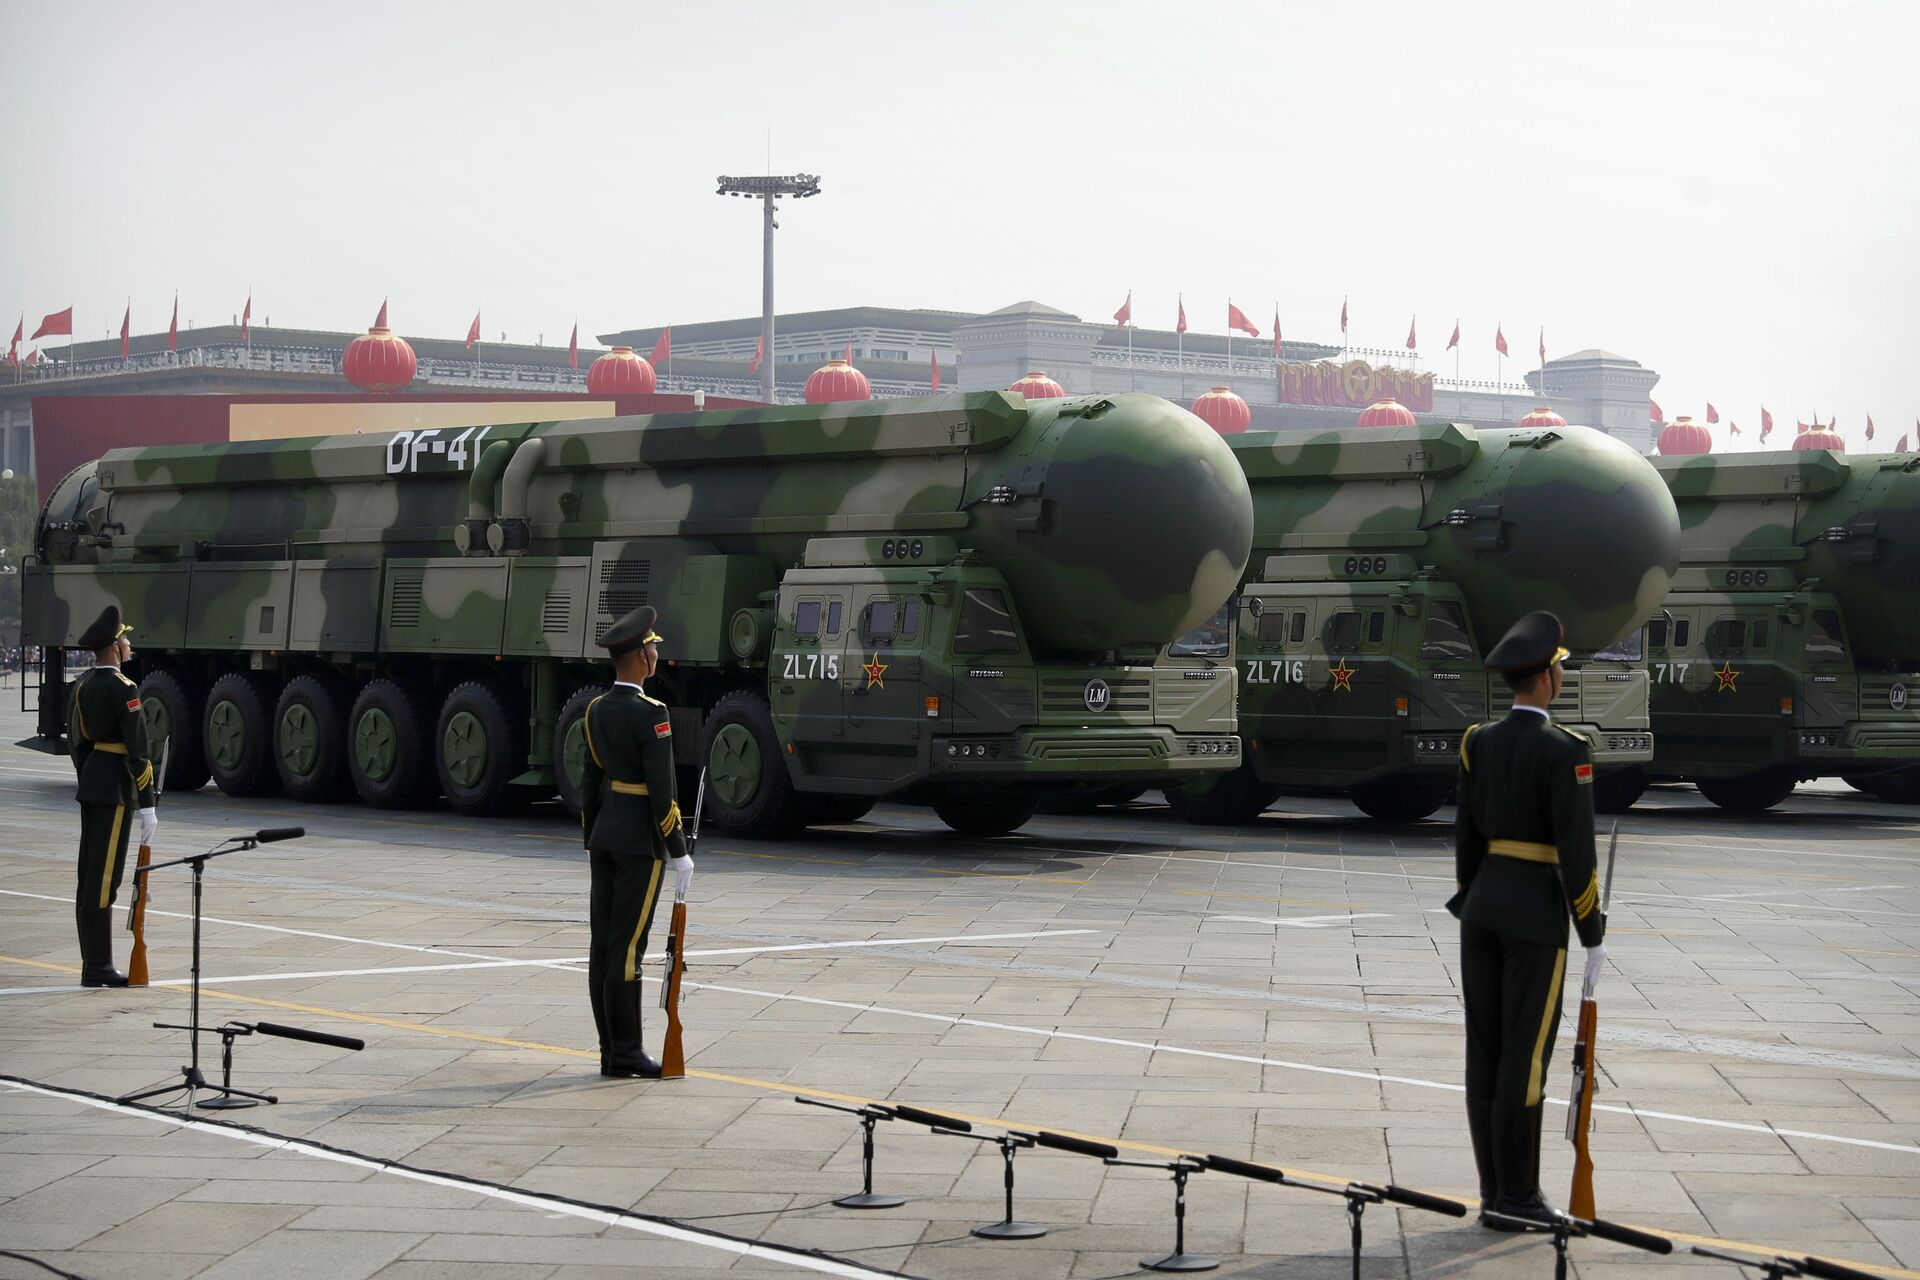 US General Warns China Nuclear Buildup ‘On Track to Exceed Previous Projections’ - Sputnik International, 1920, 30.04.2021